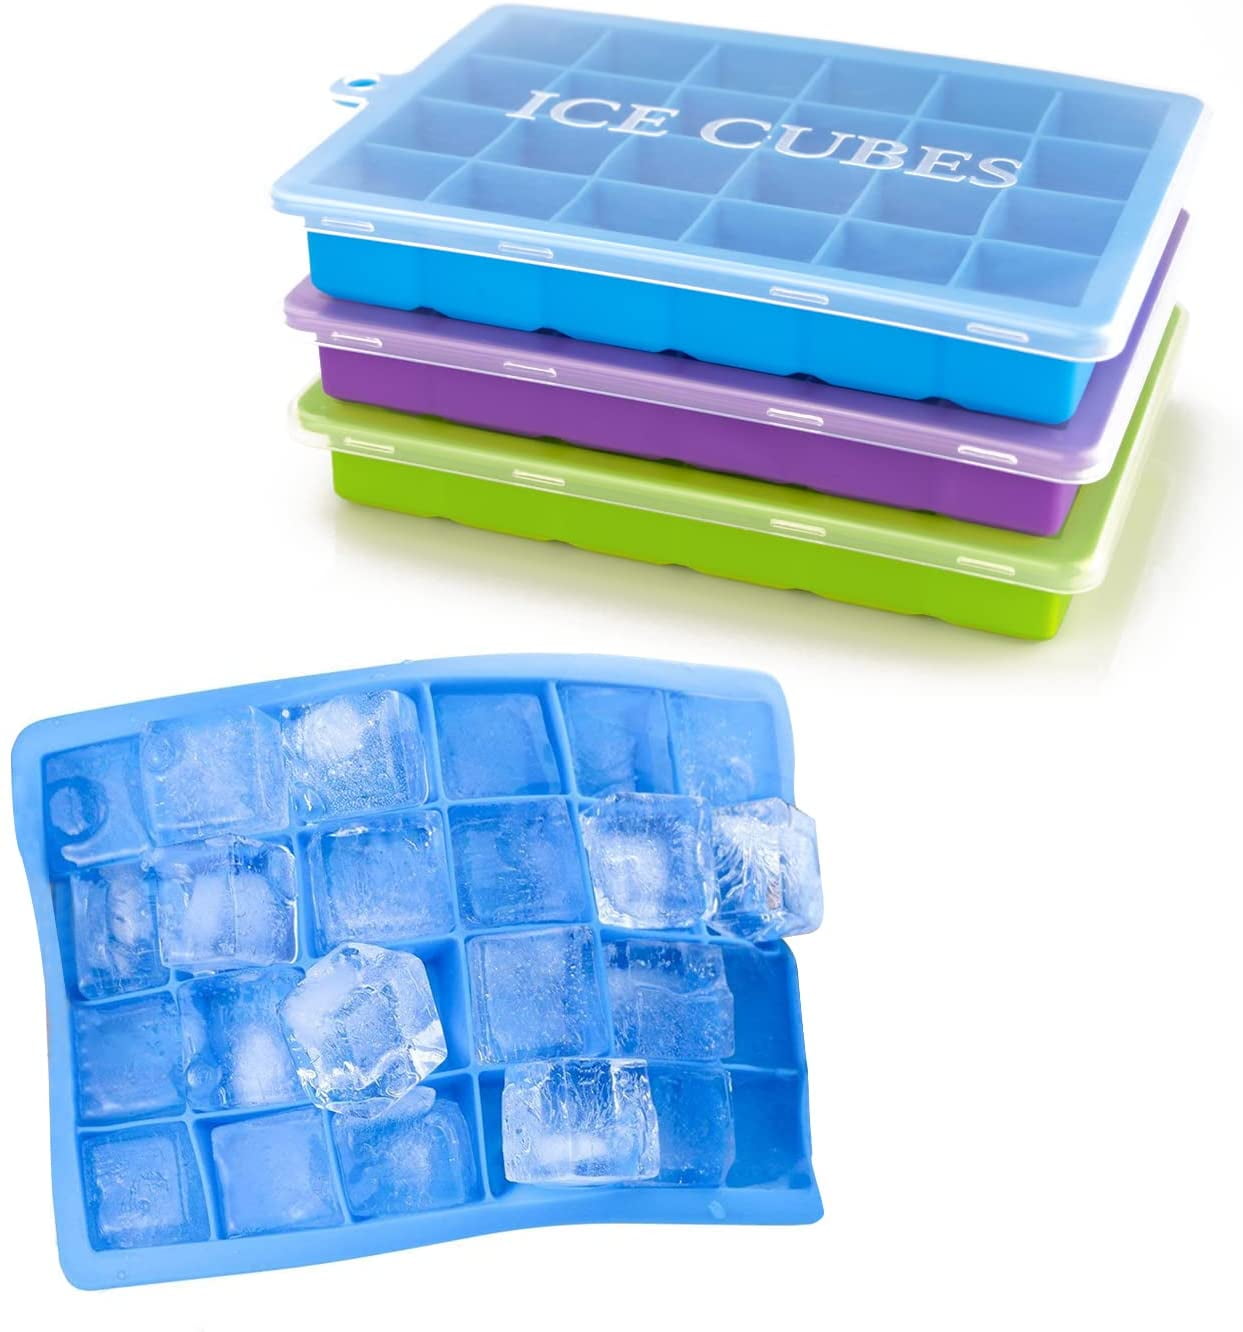 Vintage Metal Ice Cube Trays Mold Mould Tray Cubes Reusable Kitchen 2 PACK 